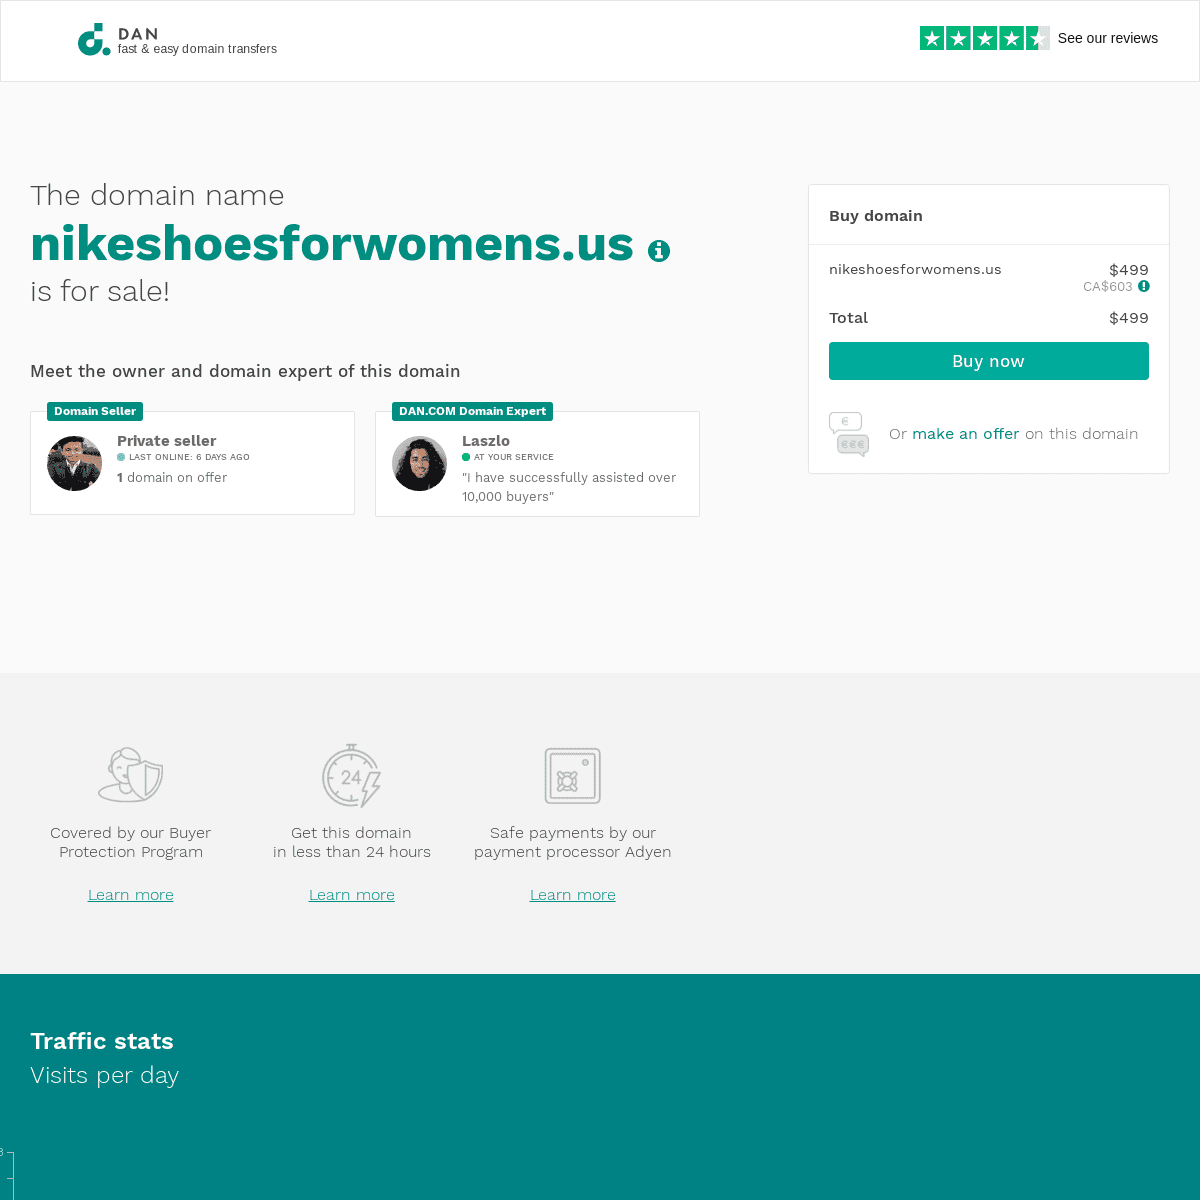 The domain name nikeshoesforwomens.us is for sale